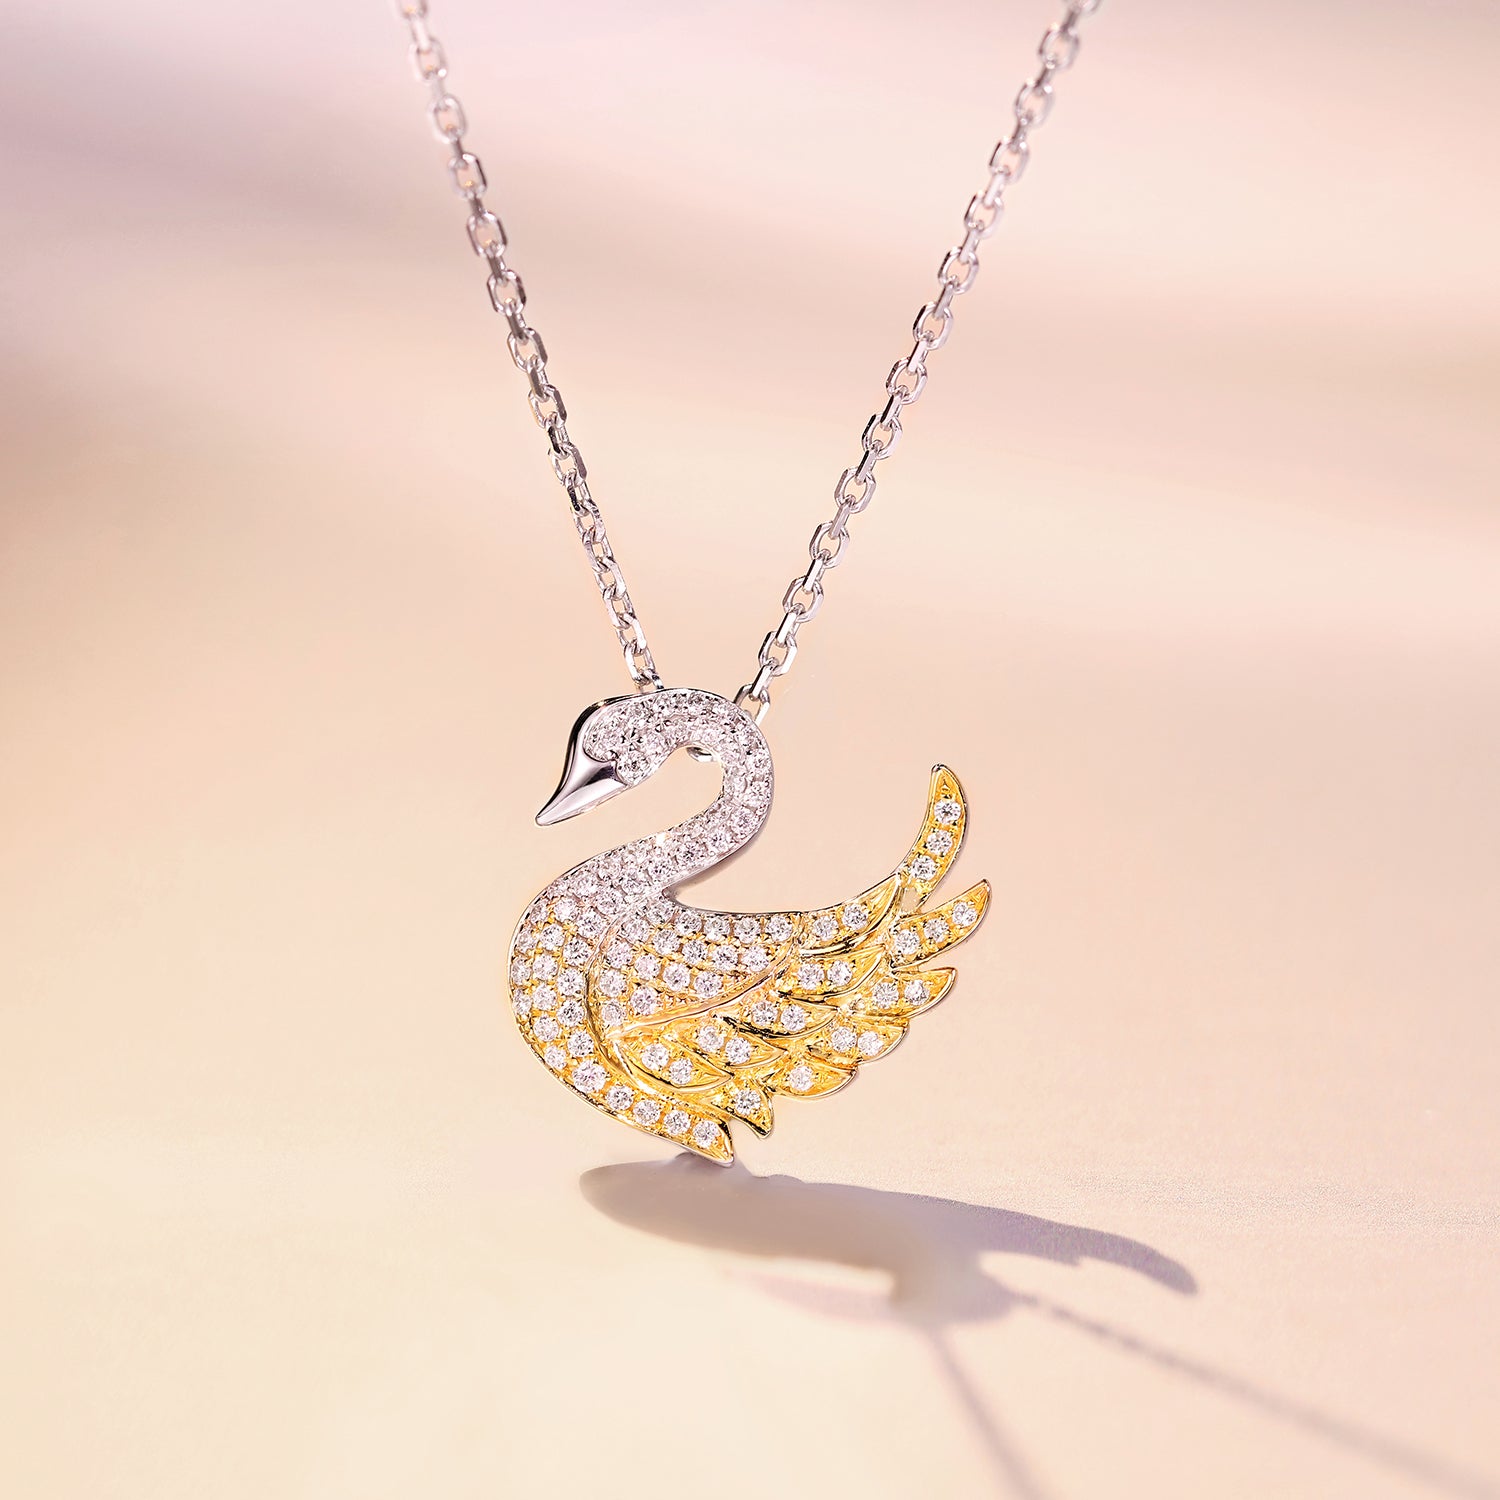 Buy 14K Gold Swan Necklace, Swan Necklace, Bird Necklace, Pair of Swans  Pendant, Swan Charm 14K Gold, Zirconia Swan Necklace, Jewelry Gift Gold  Online in India - Etsy